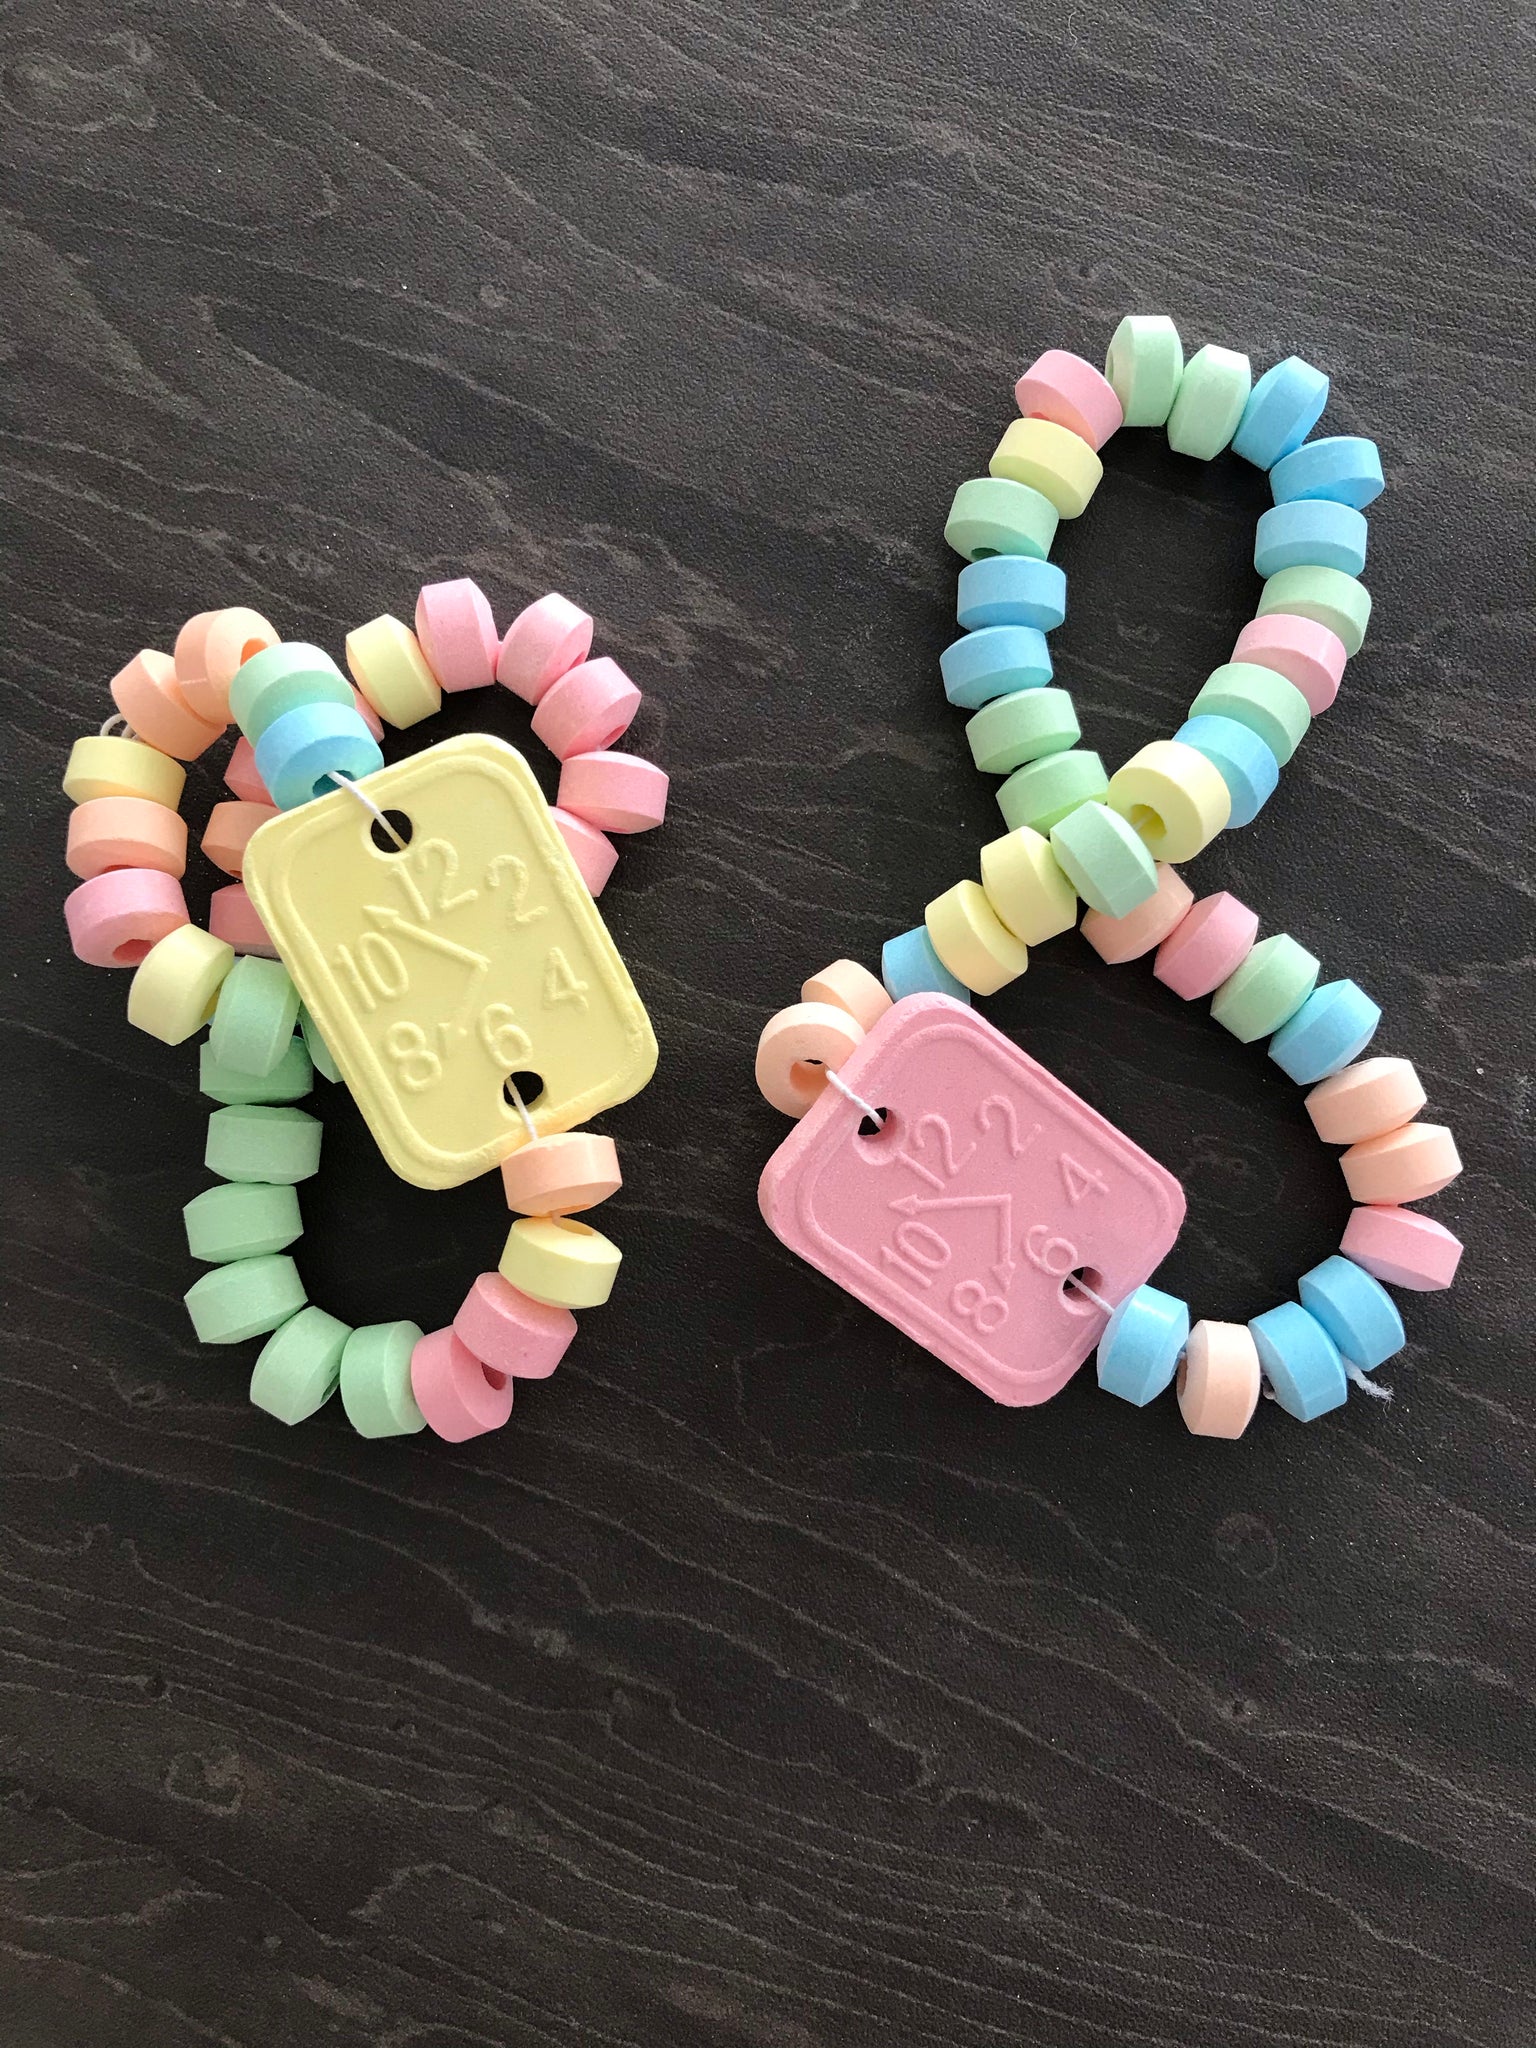 Retro Candy Necklaces and Watches (x2 each) – Unicorn Sweet Boxes